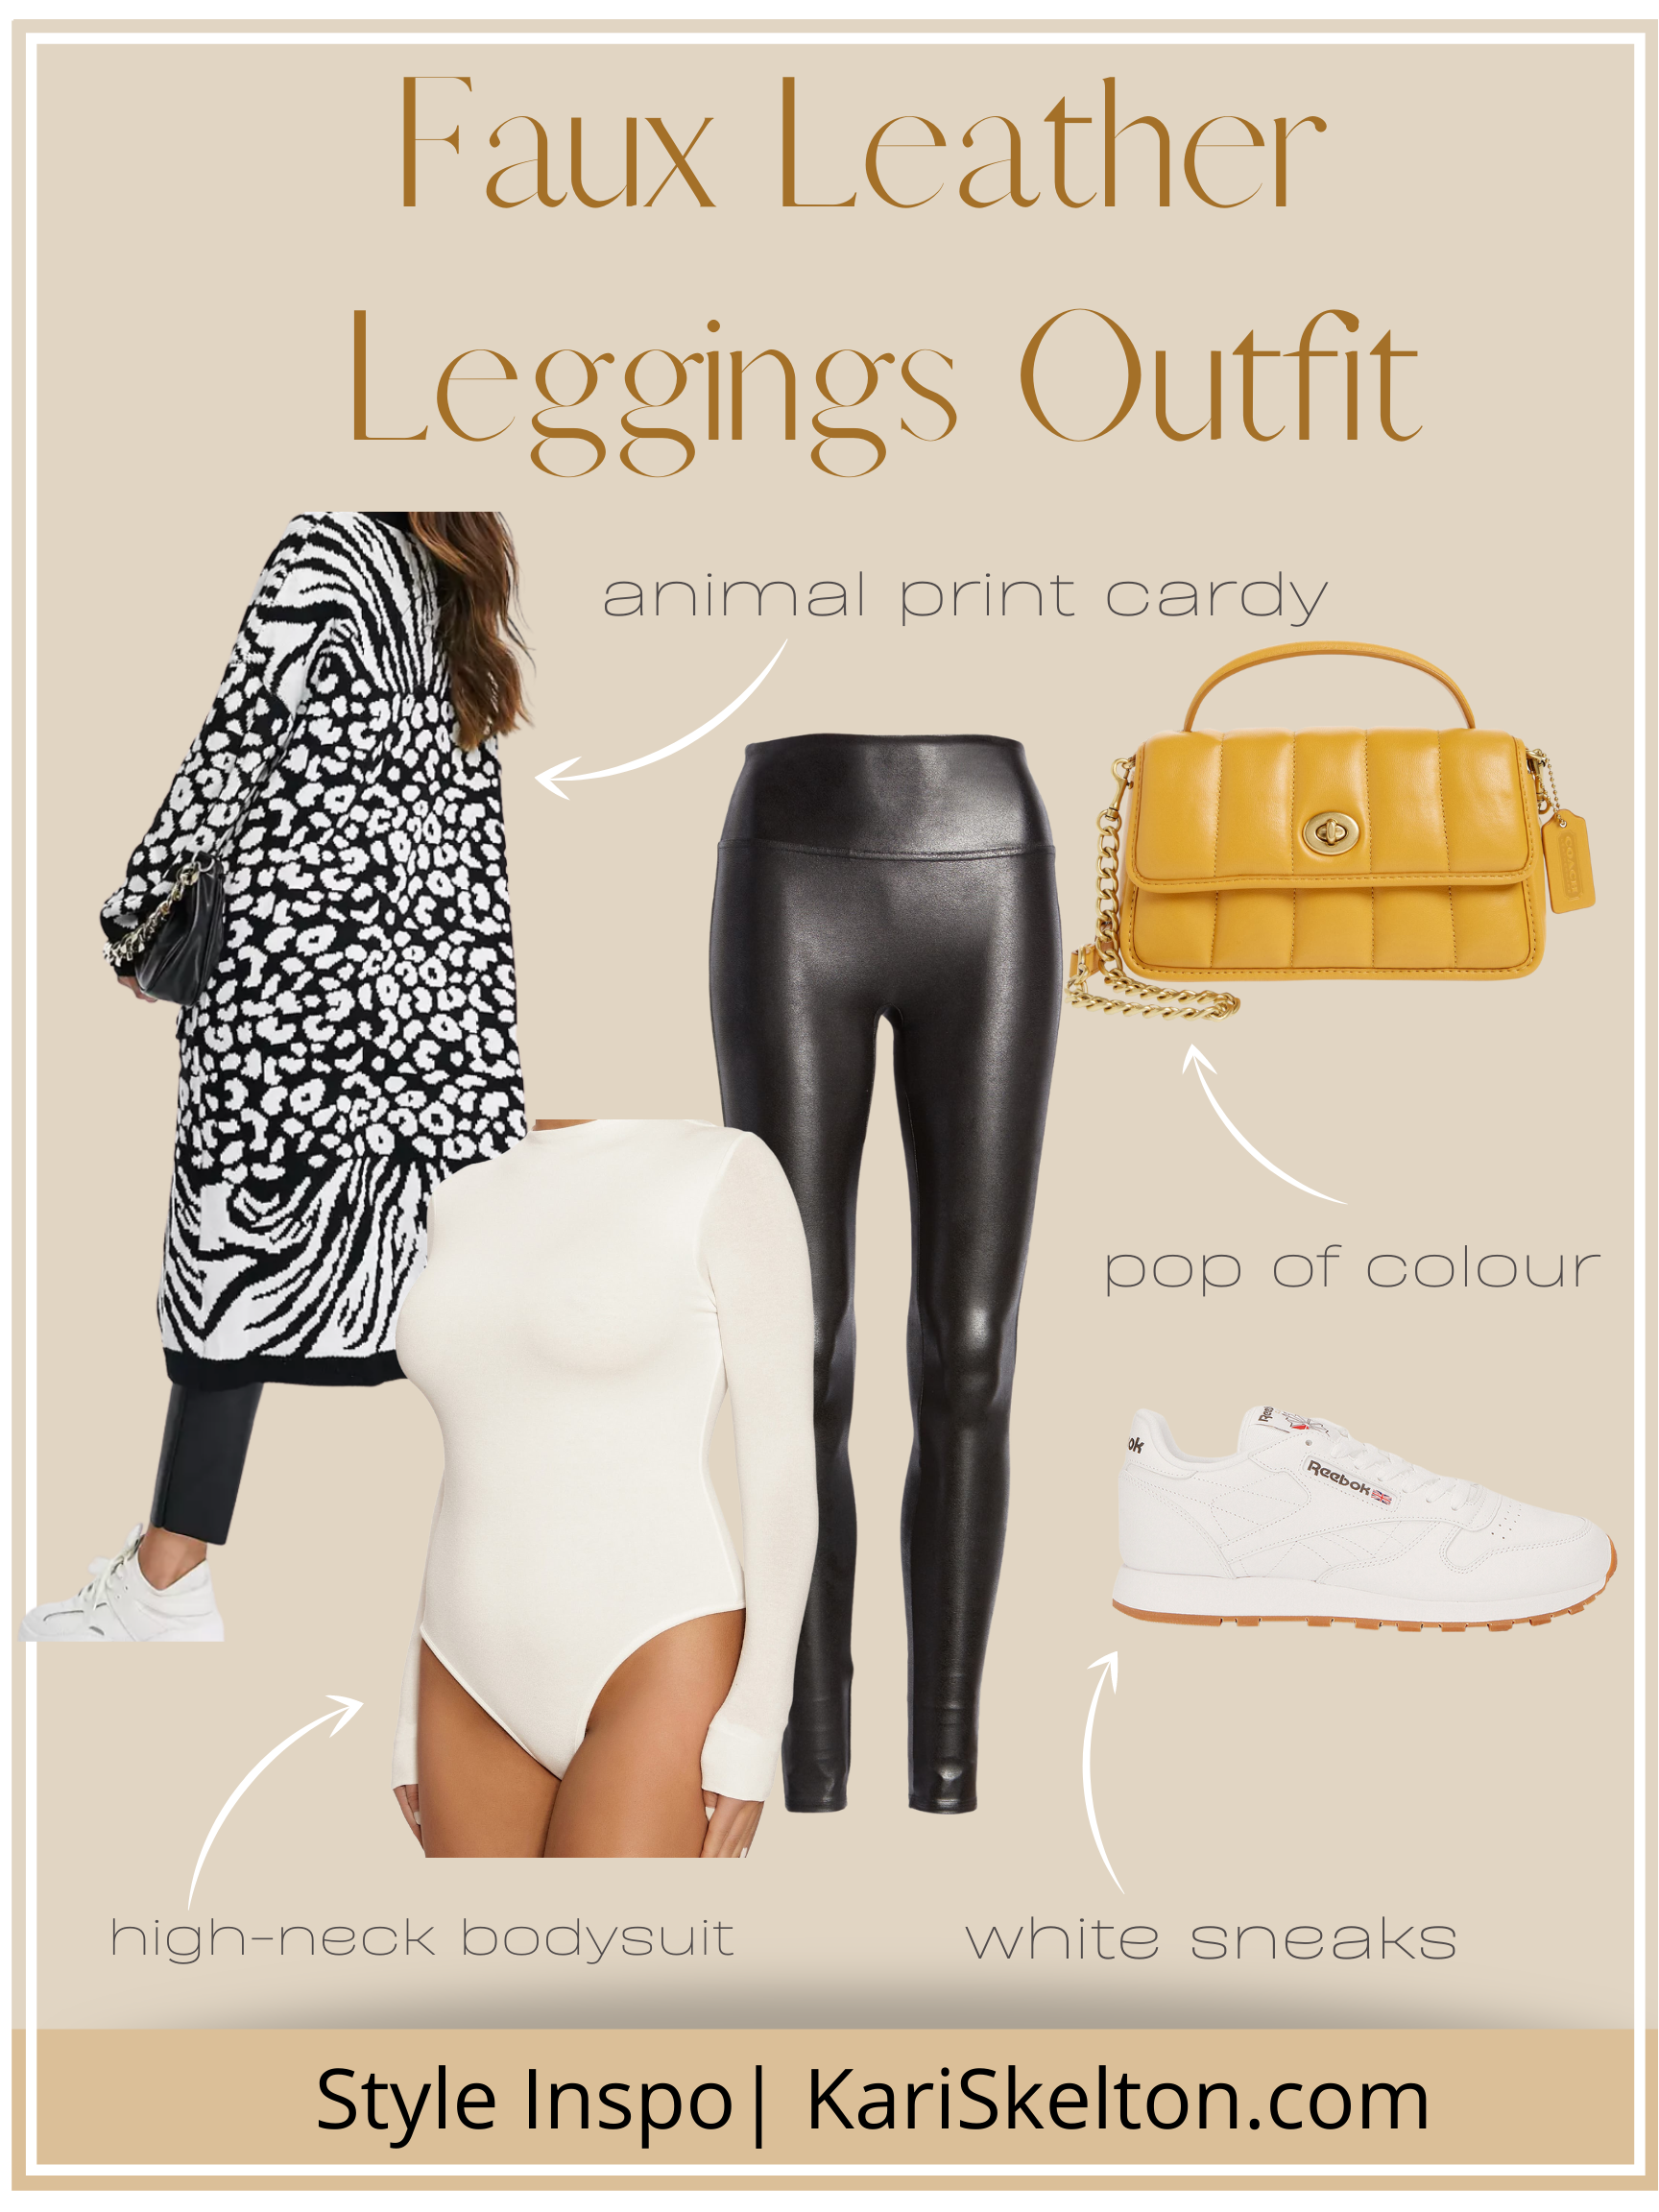 Leather Leggings Weekend Chic Outfit - Affordable French Chic